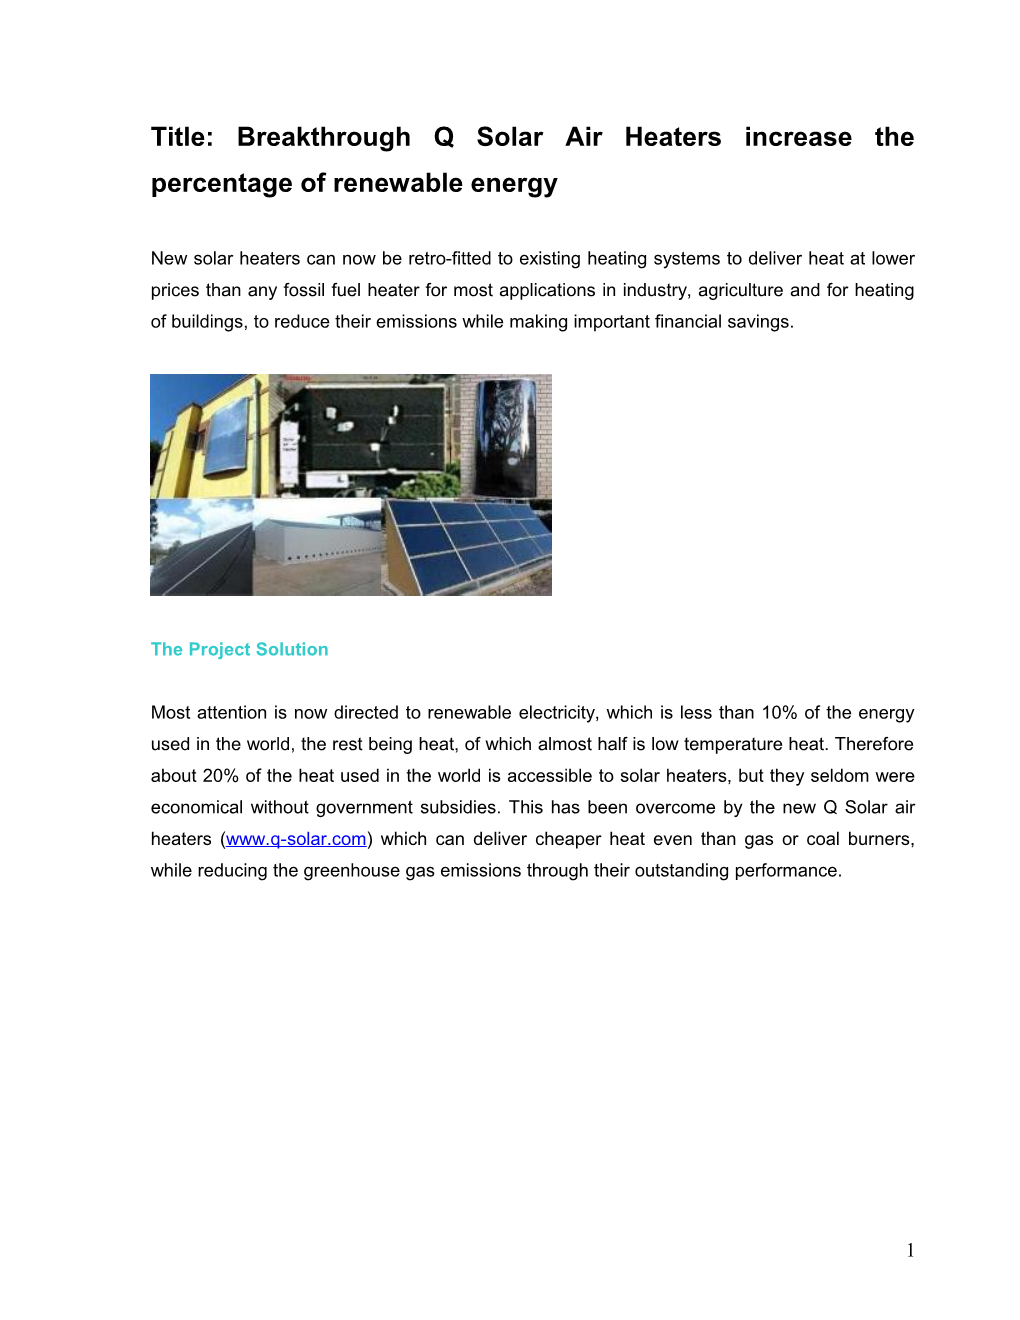 Uptake of the Most Economical Solar Thermal Energy in Australian Commercial Applications